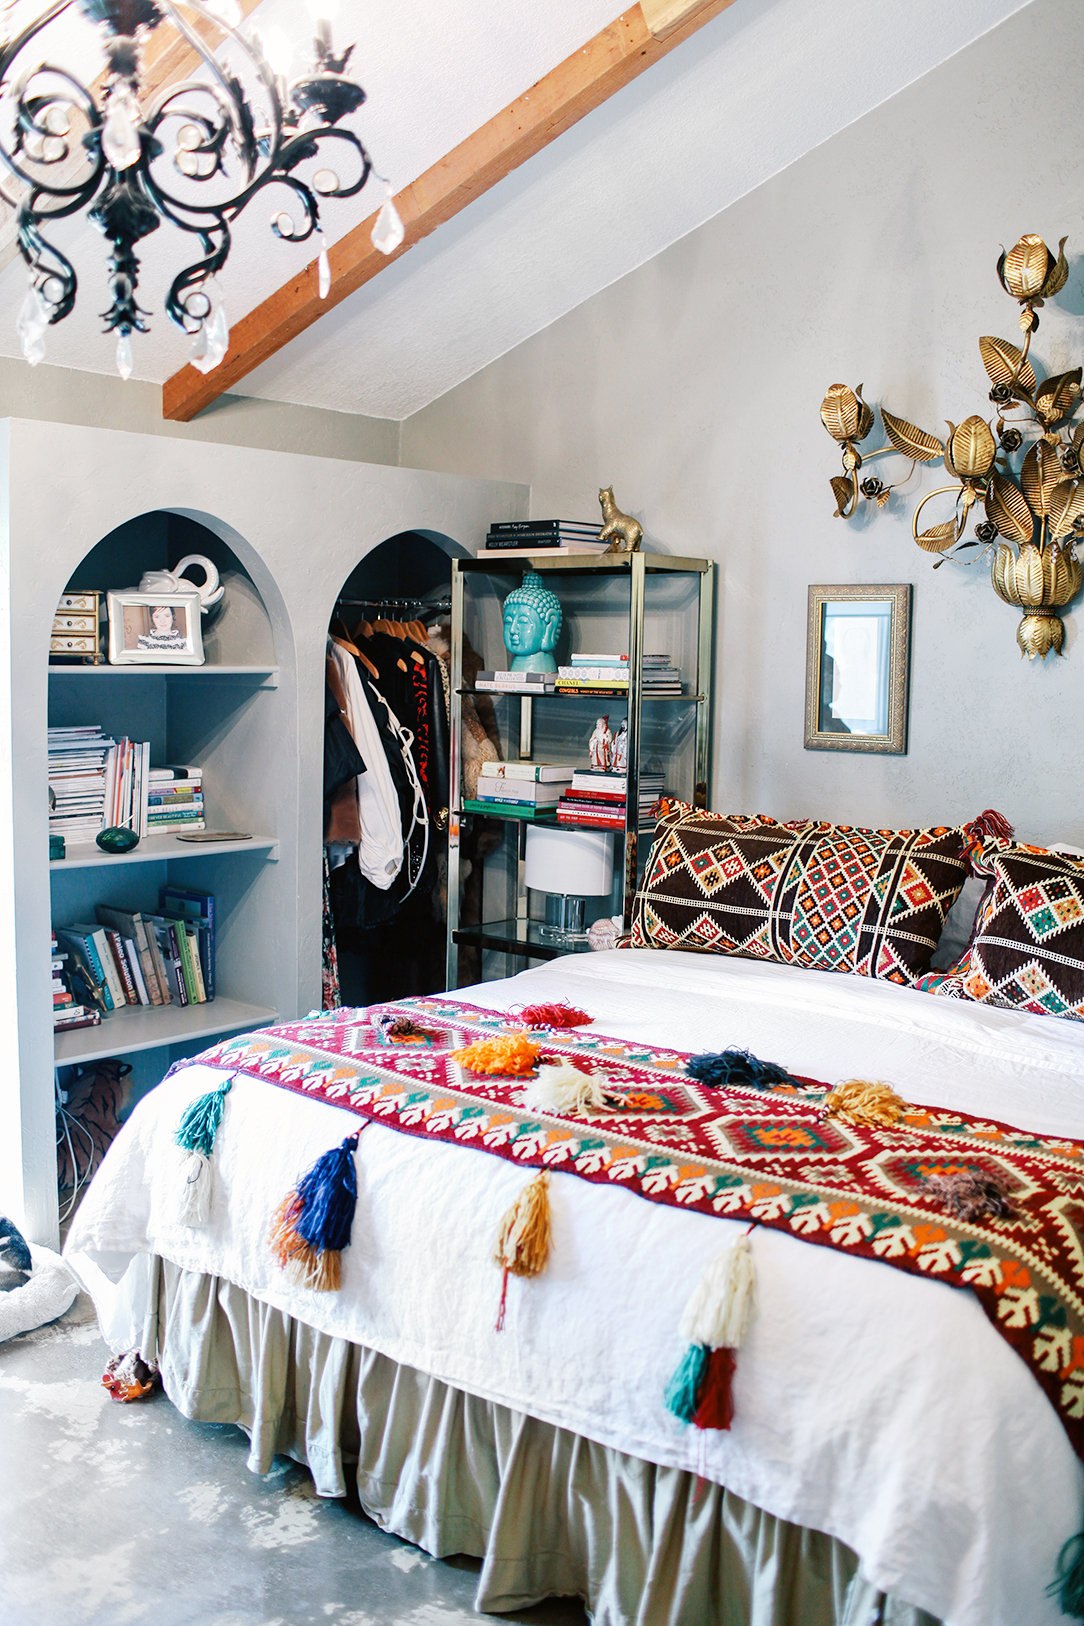 Boho style in the interior: inspiration ideas – Inspirations